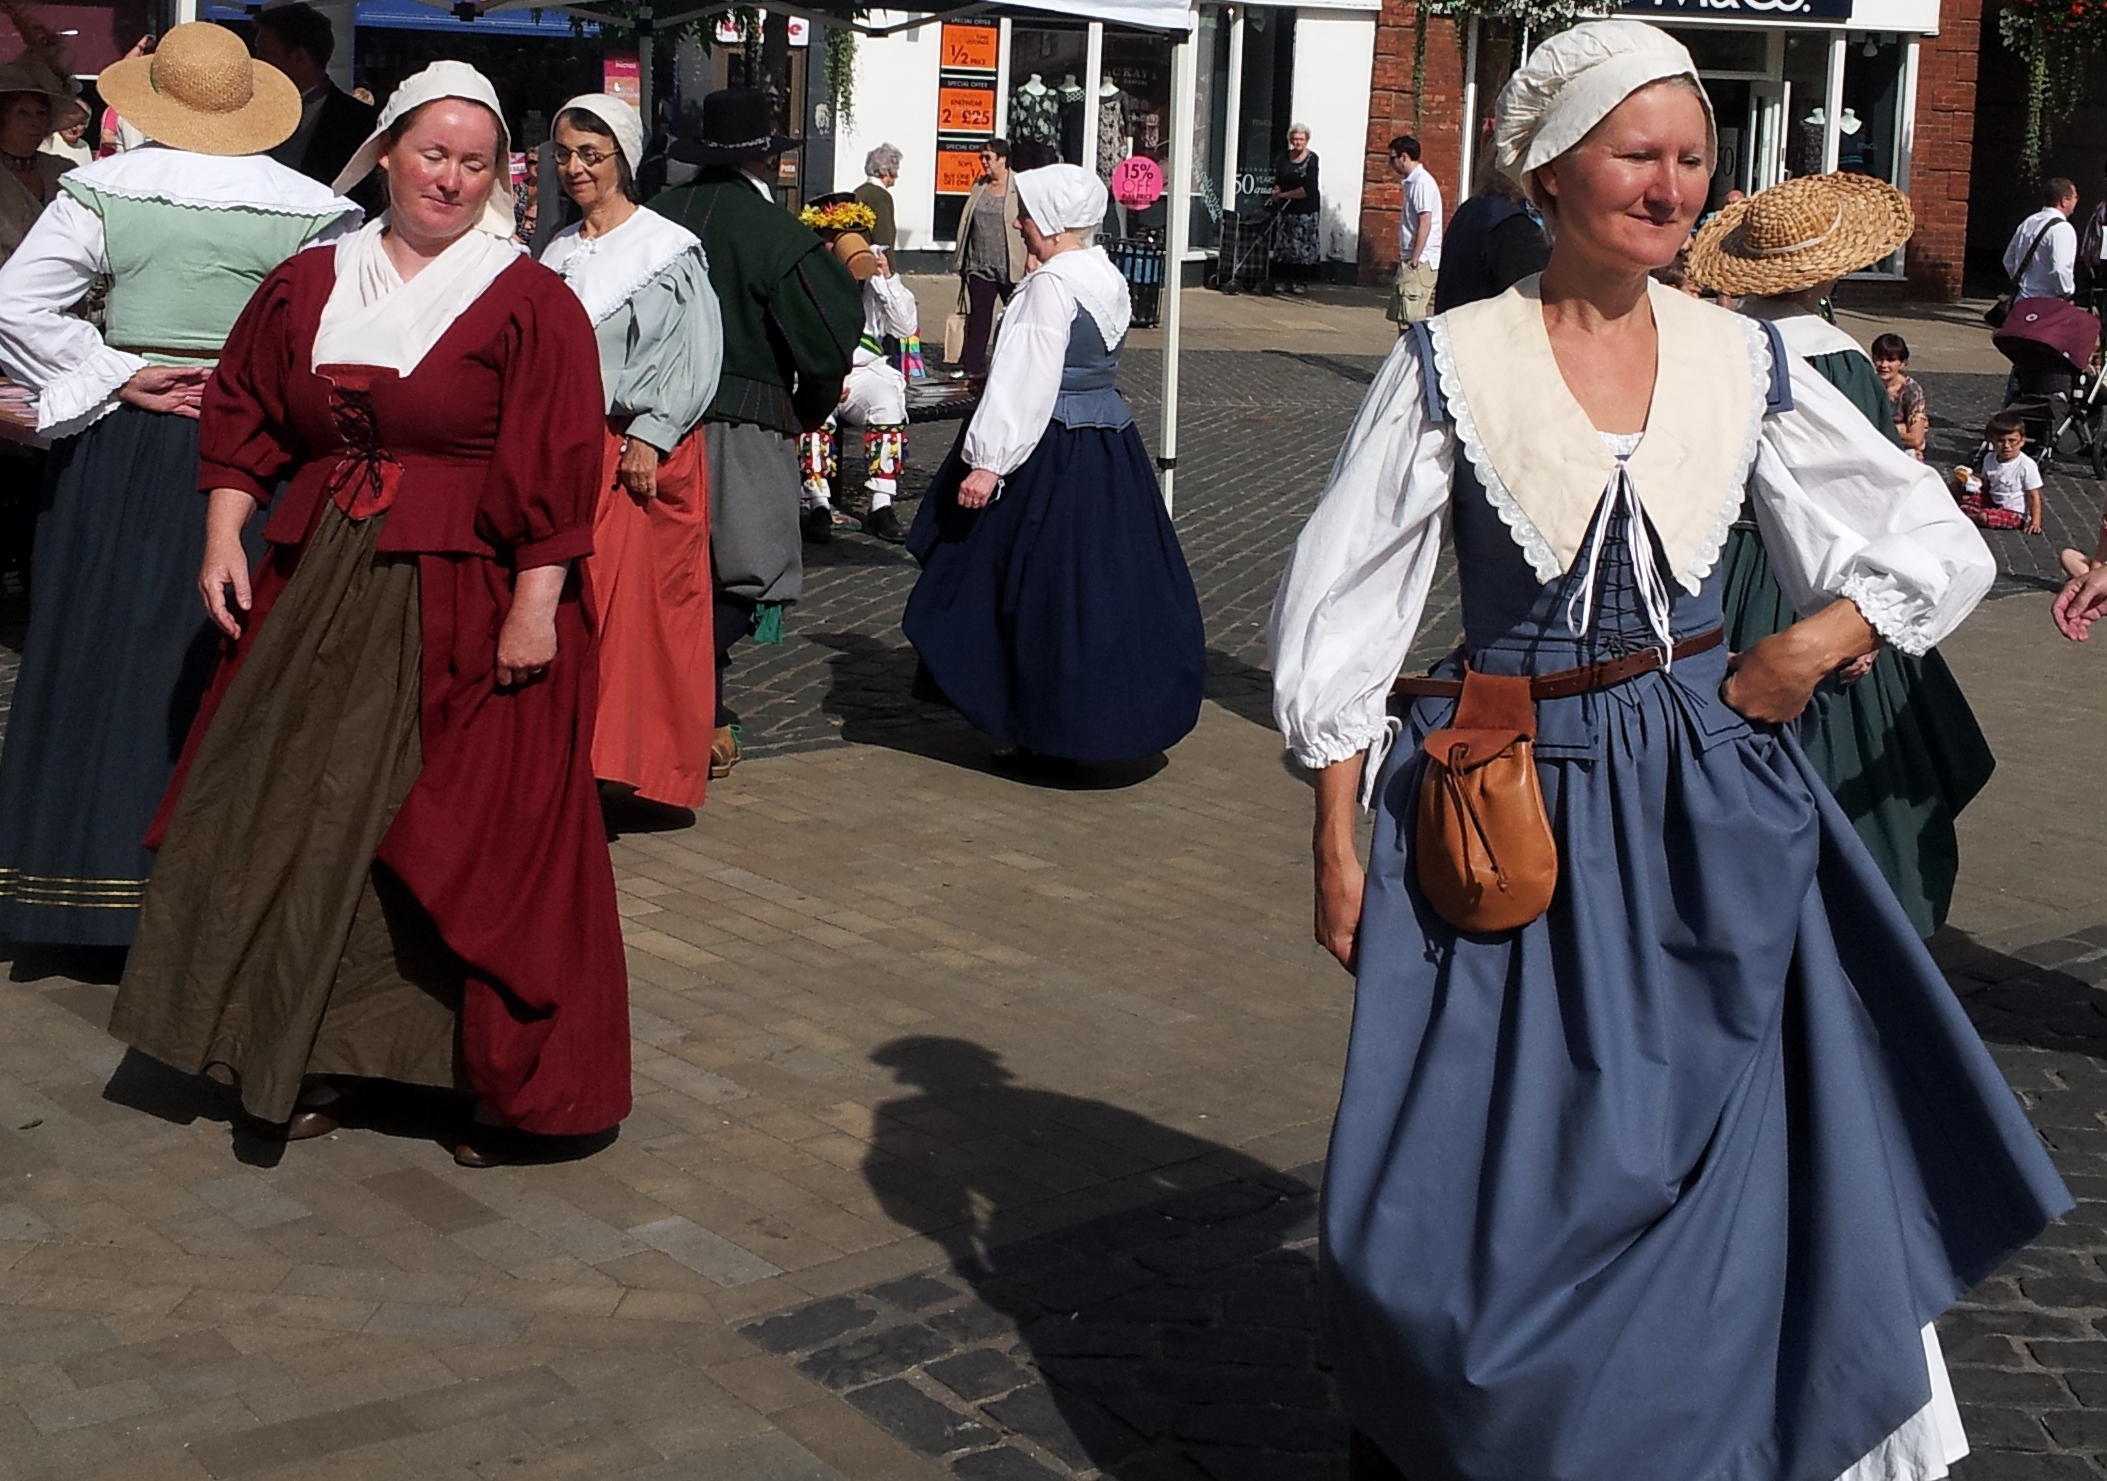 Sixteenth century costumed dancers in the Market Place